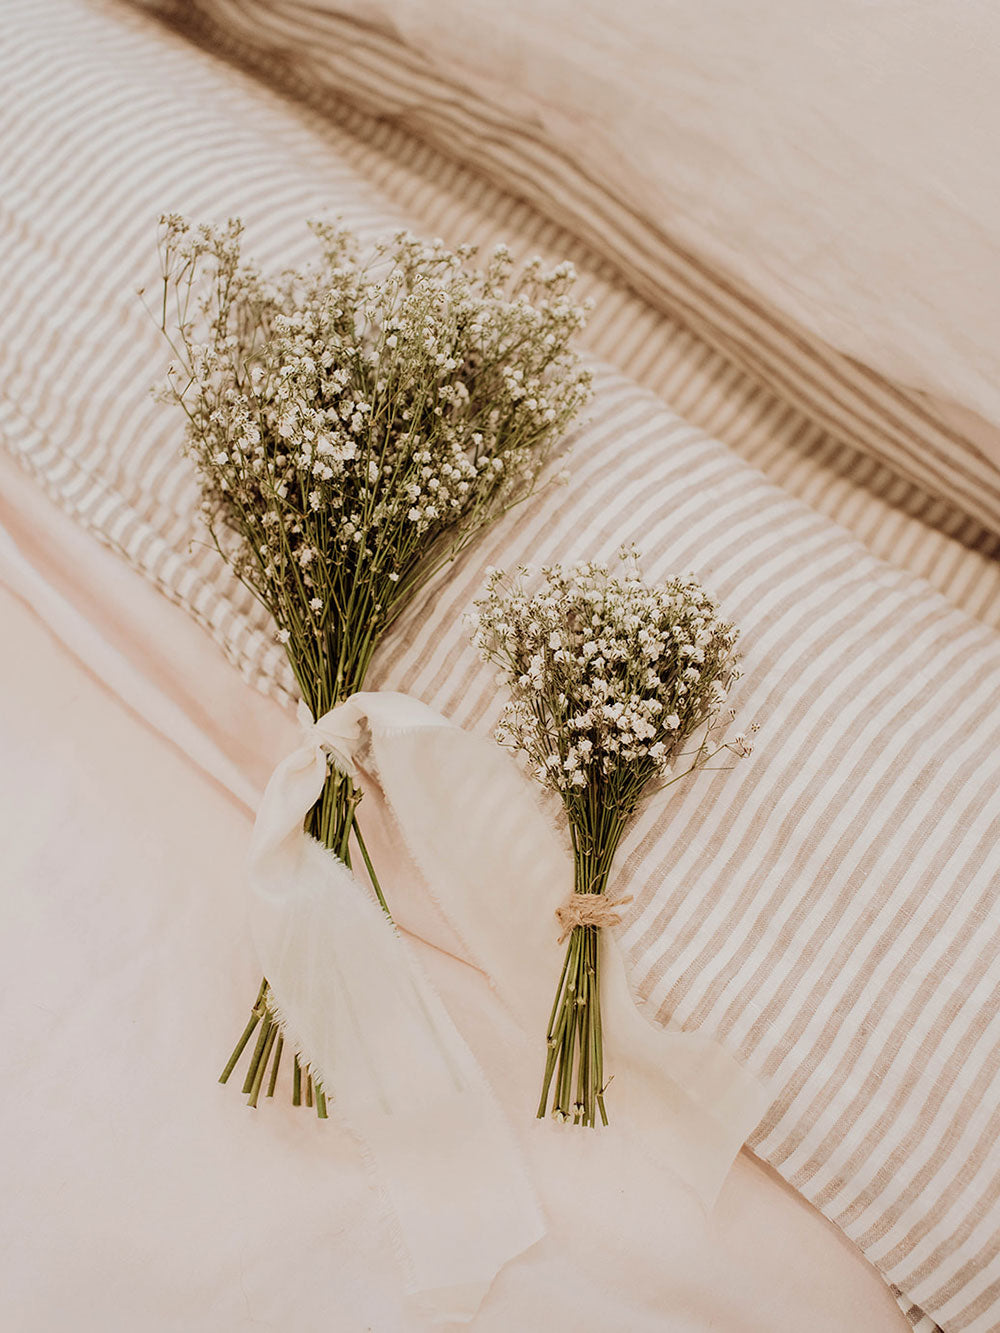 Know the Rose  Dried Baby's Breath Bunch